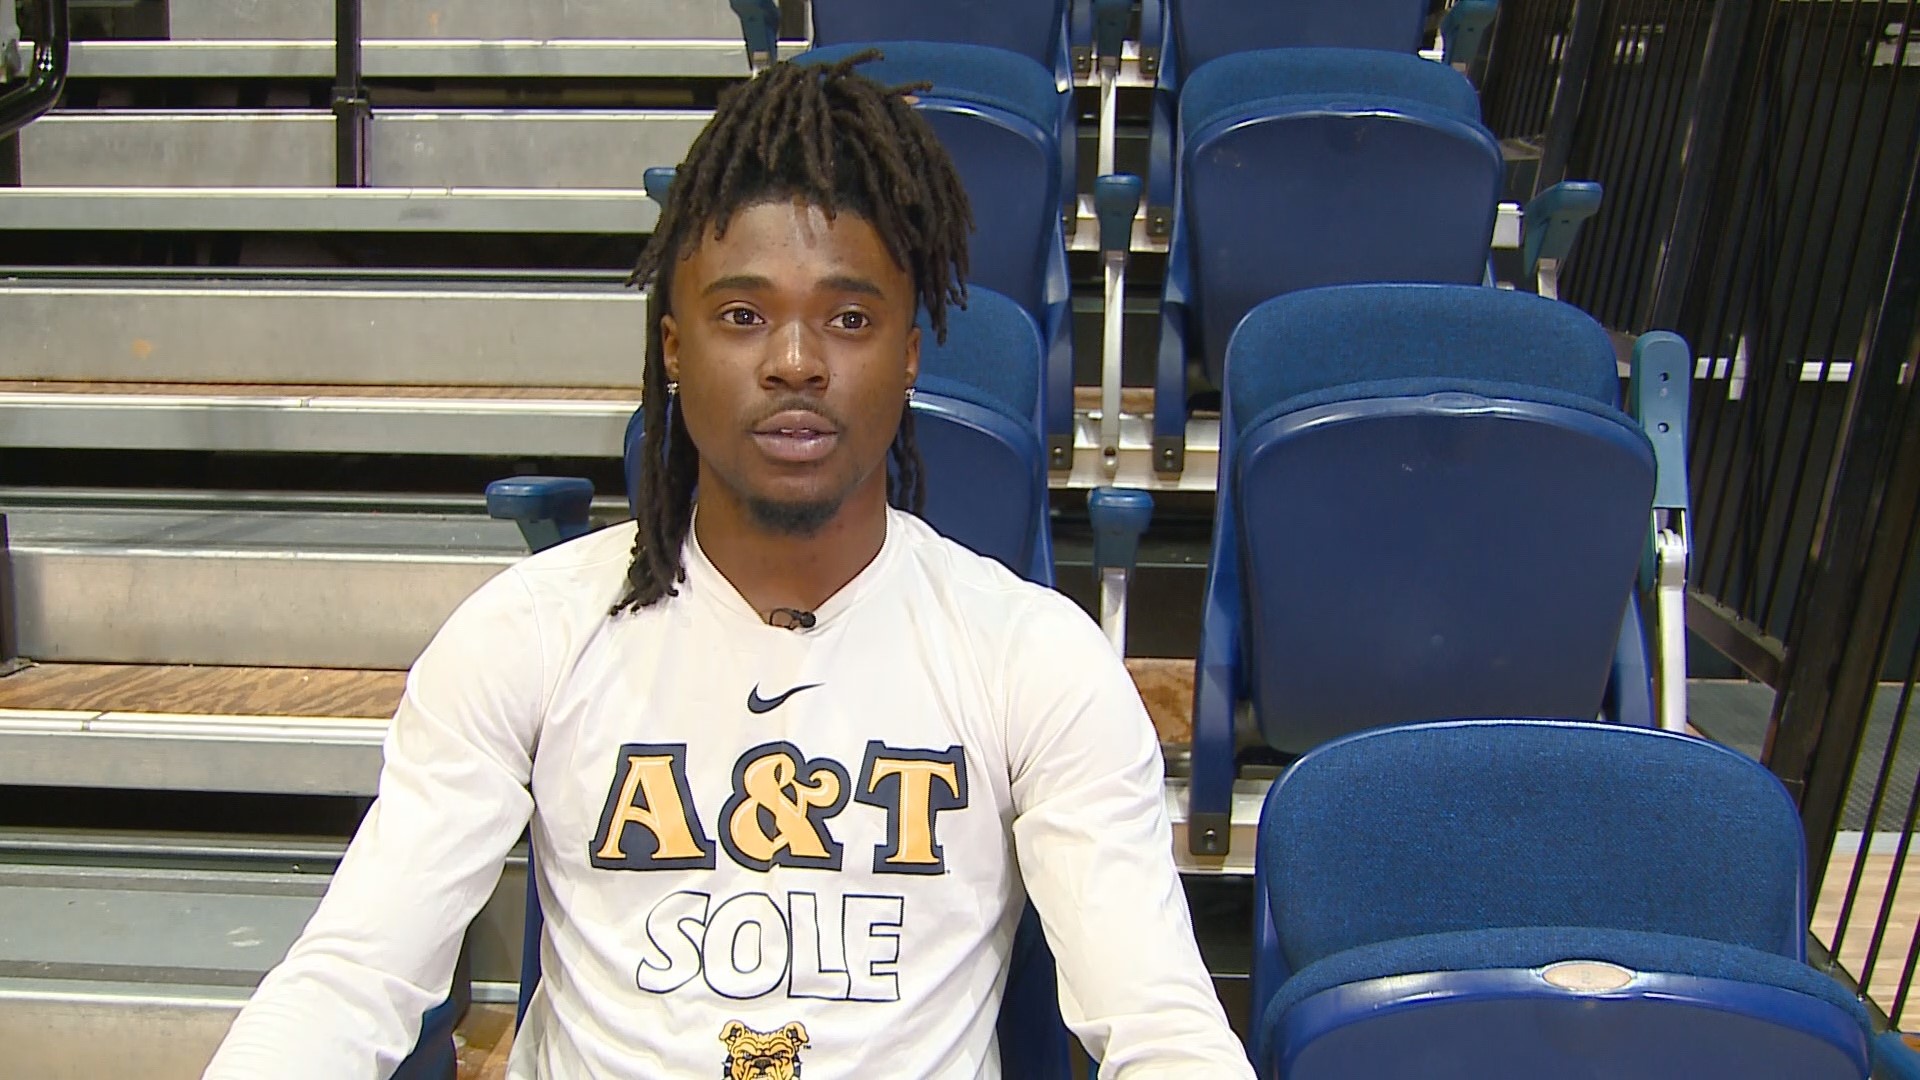 Teammate Camian Shell helped recruit Landon Glasper to A&T.